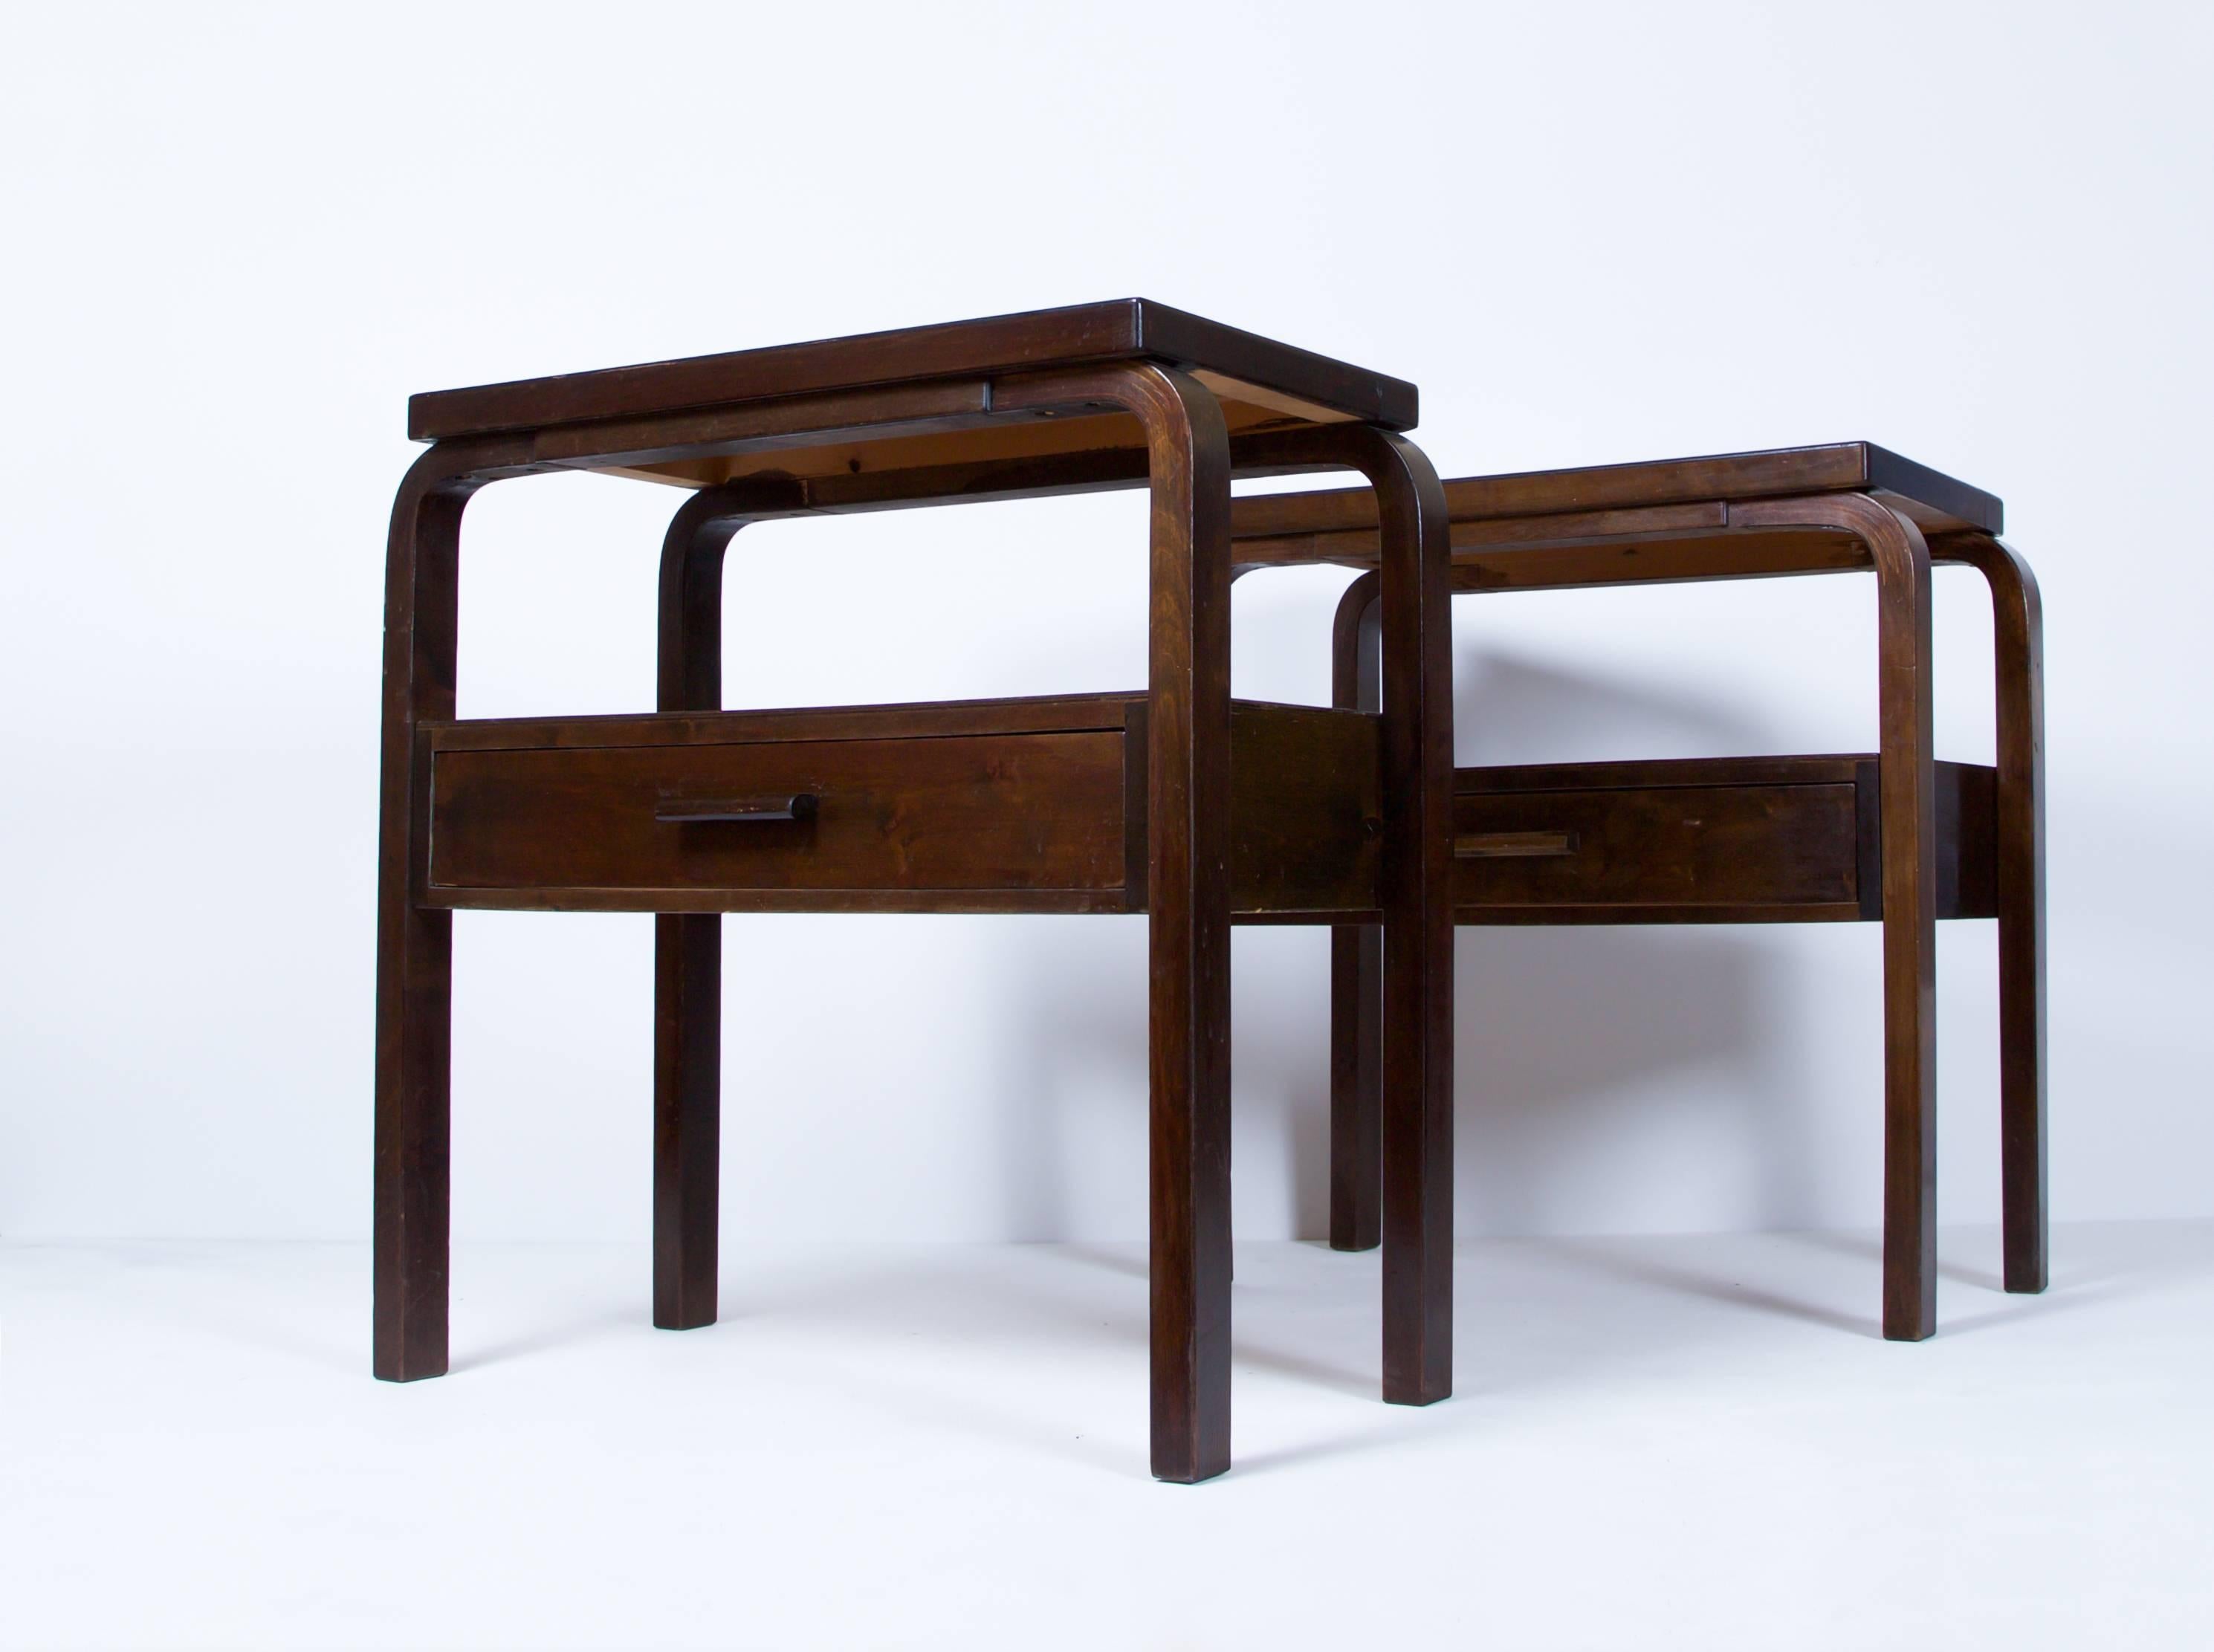 Stained Early Alvar Aalto Pair of Side Tables, circa 1940s